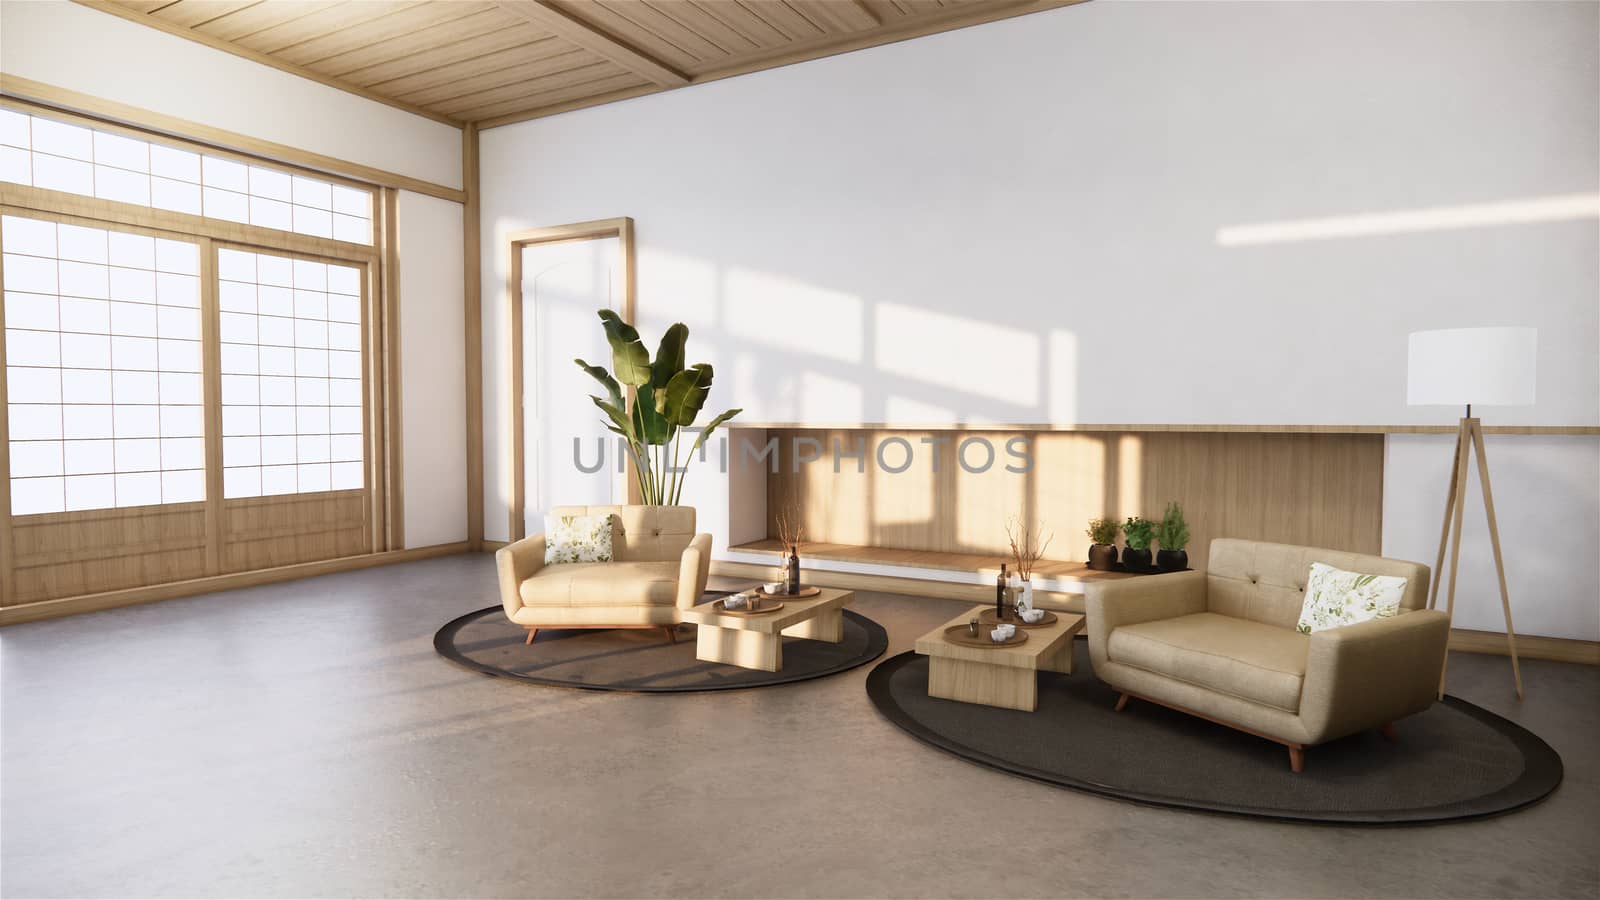 room zen style and decoraion wooden design, earth tone.3D rendering